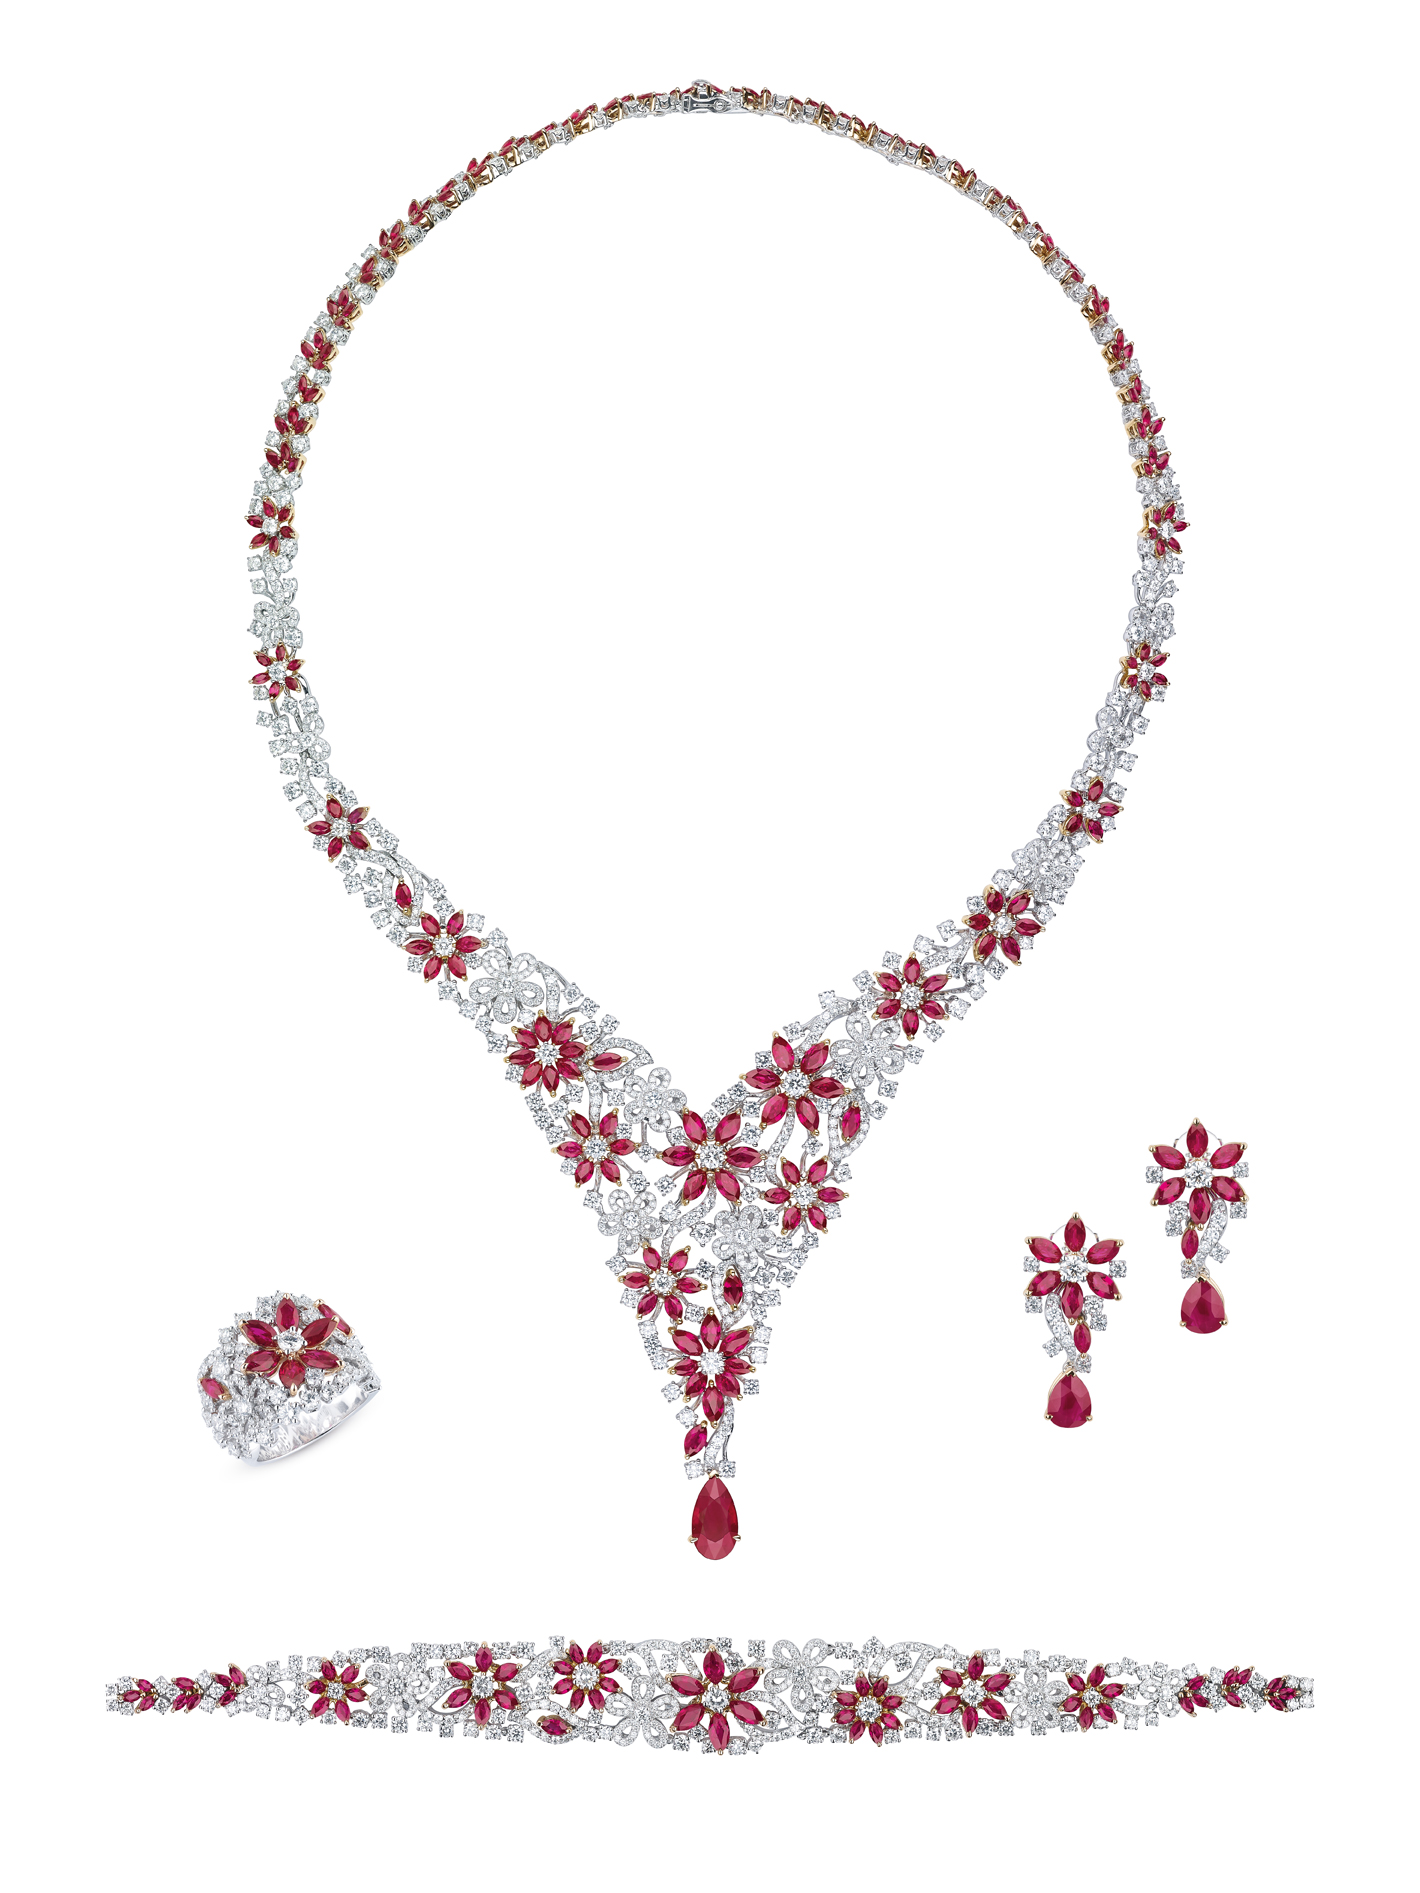 18-KARAT (750) WHITE AND ROSE GOLD NECKLACE, BRACELET, EARRINGS, AND RING SUITE SET WITH DIAMONDS AND RUBIES BY MOUAWAD